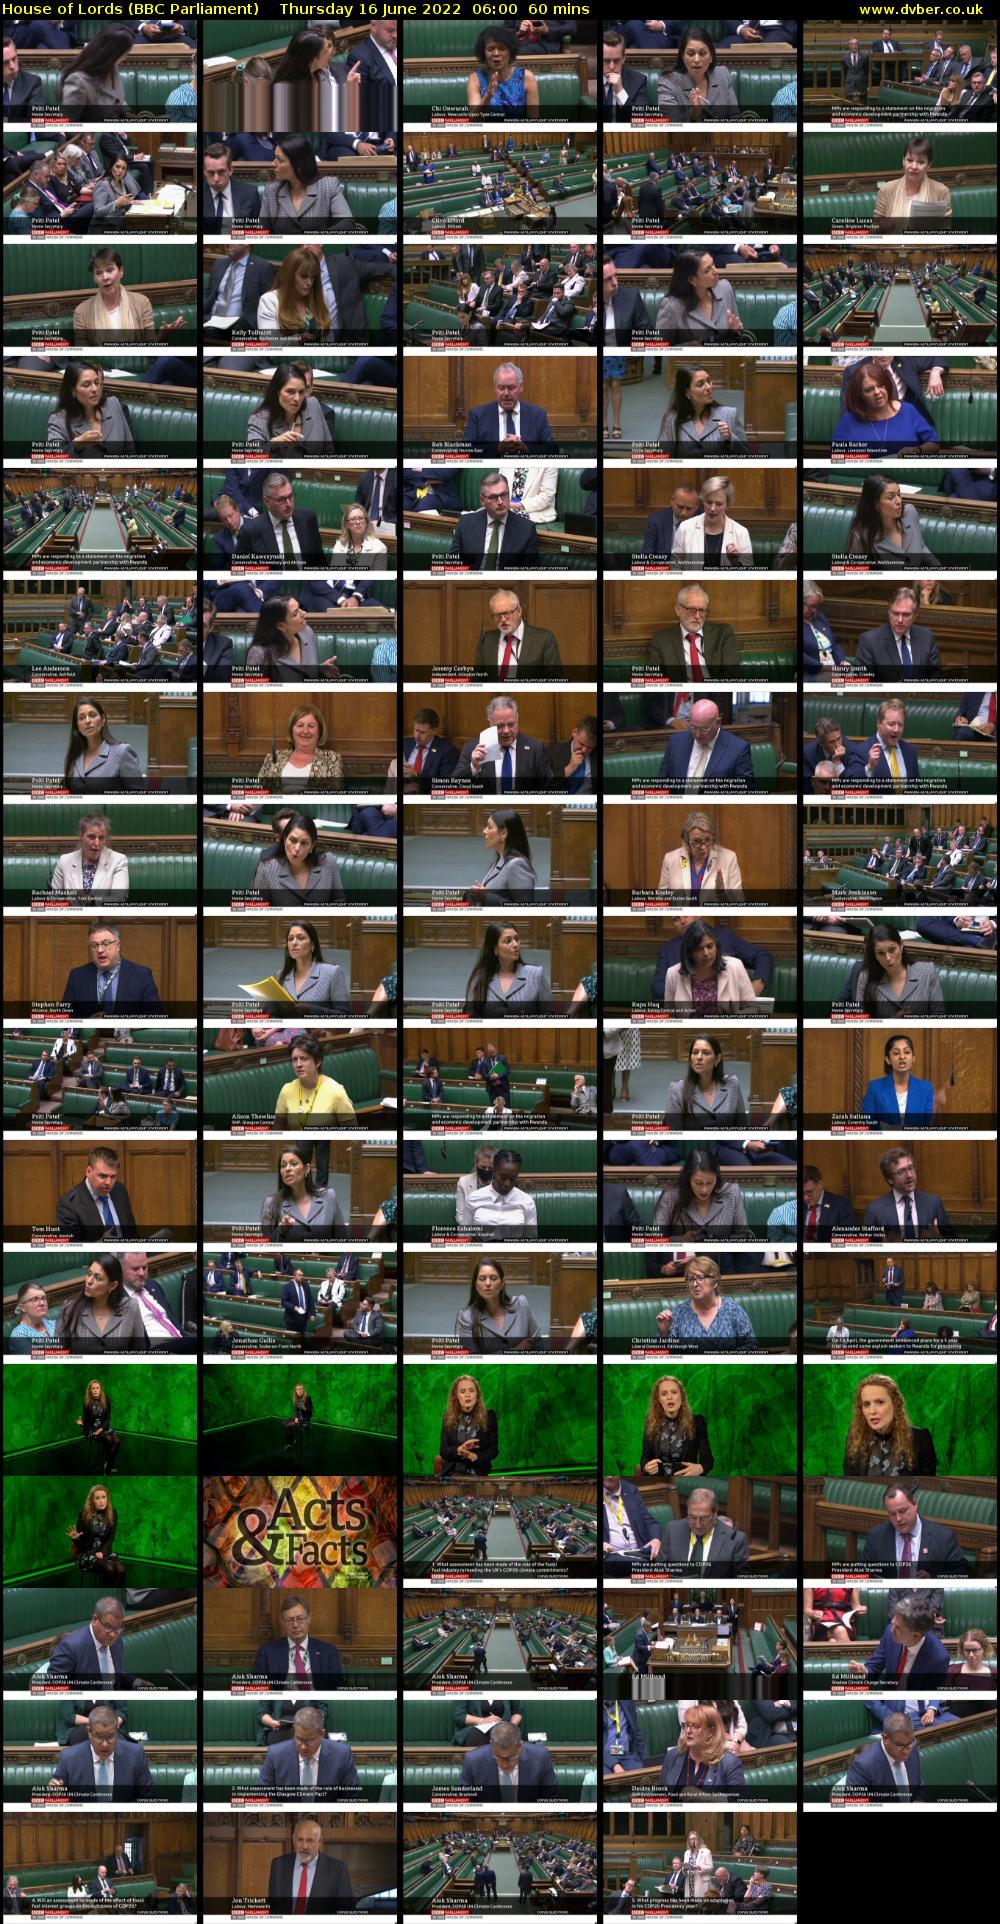 House of Lords (BBC Parliament) Thursday 16 June 2022 06:00 - 07:00